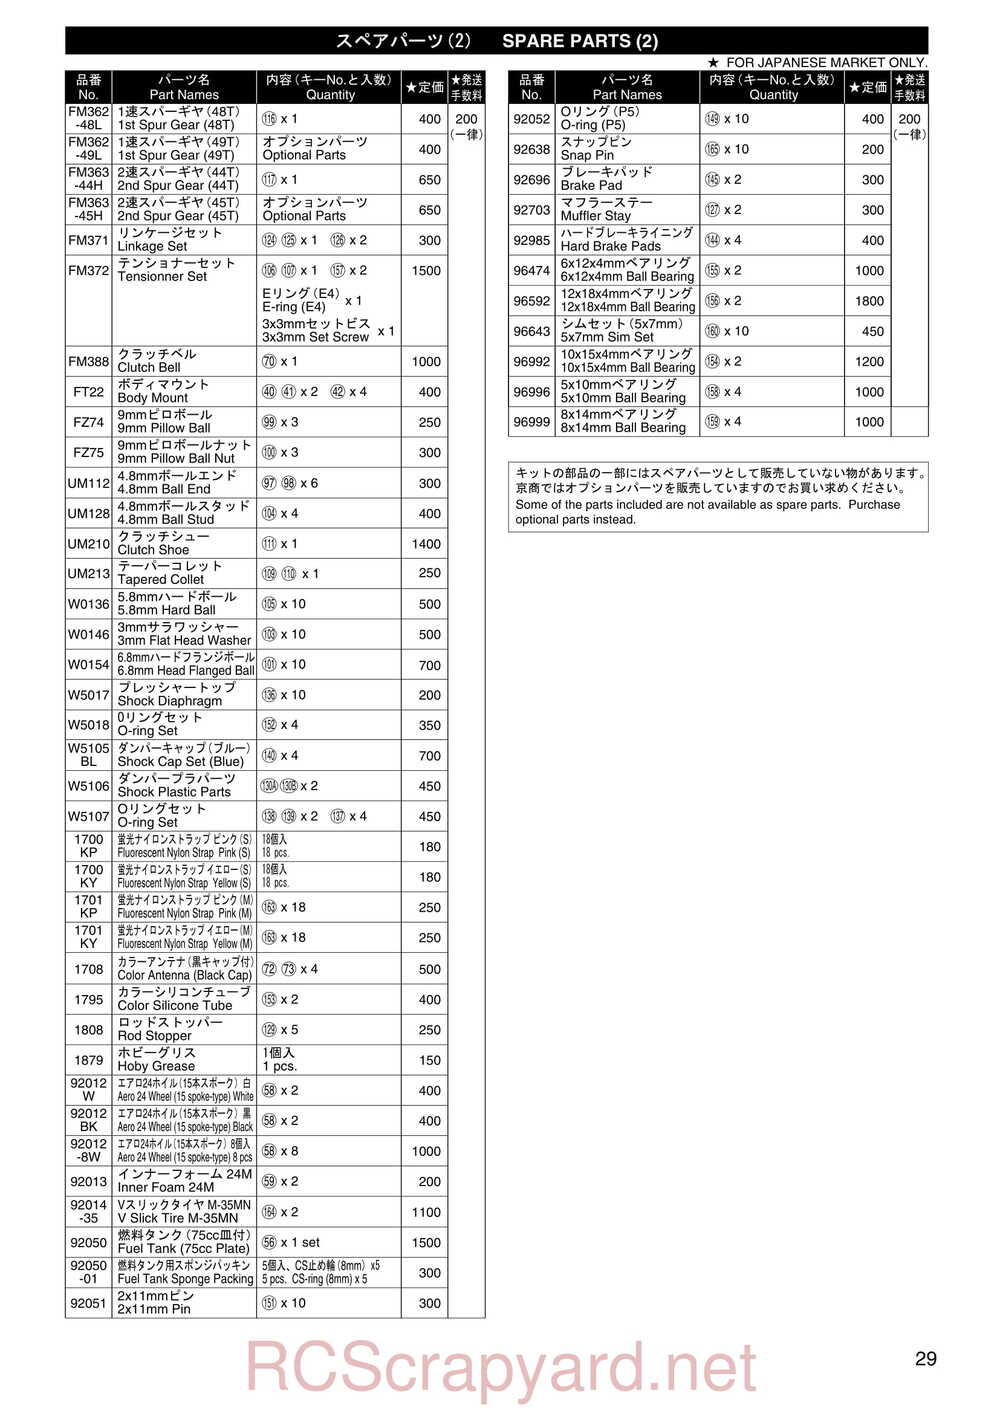 Kyosho - 31011 - V-One R - Manual - Page 28